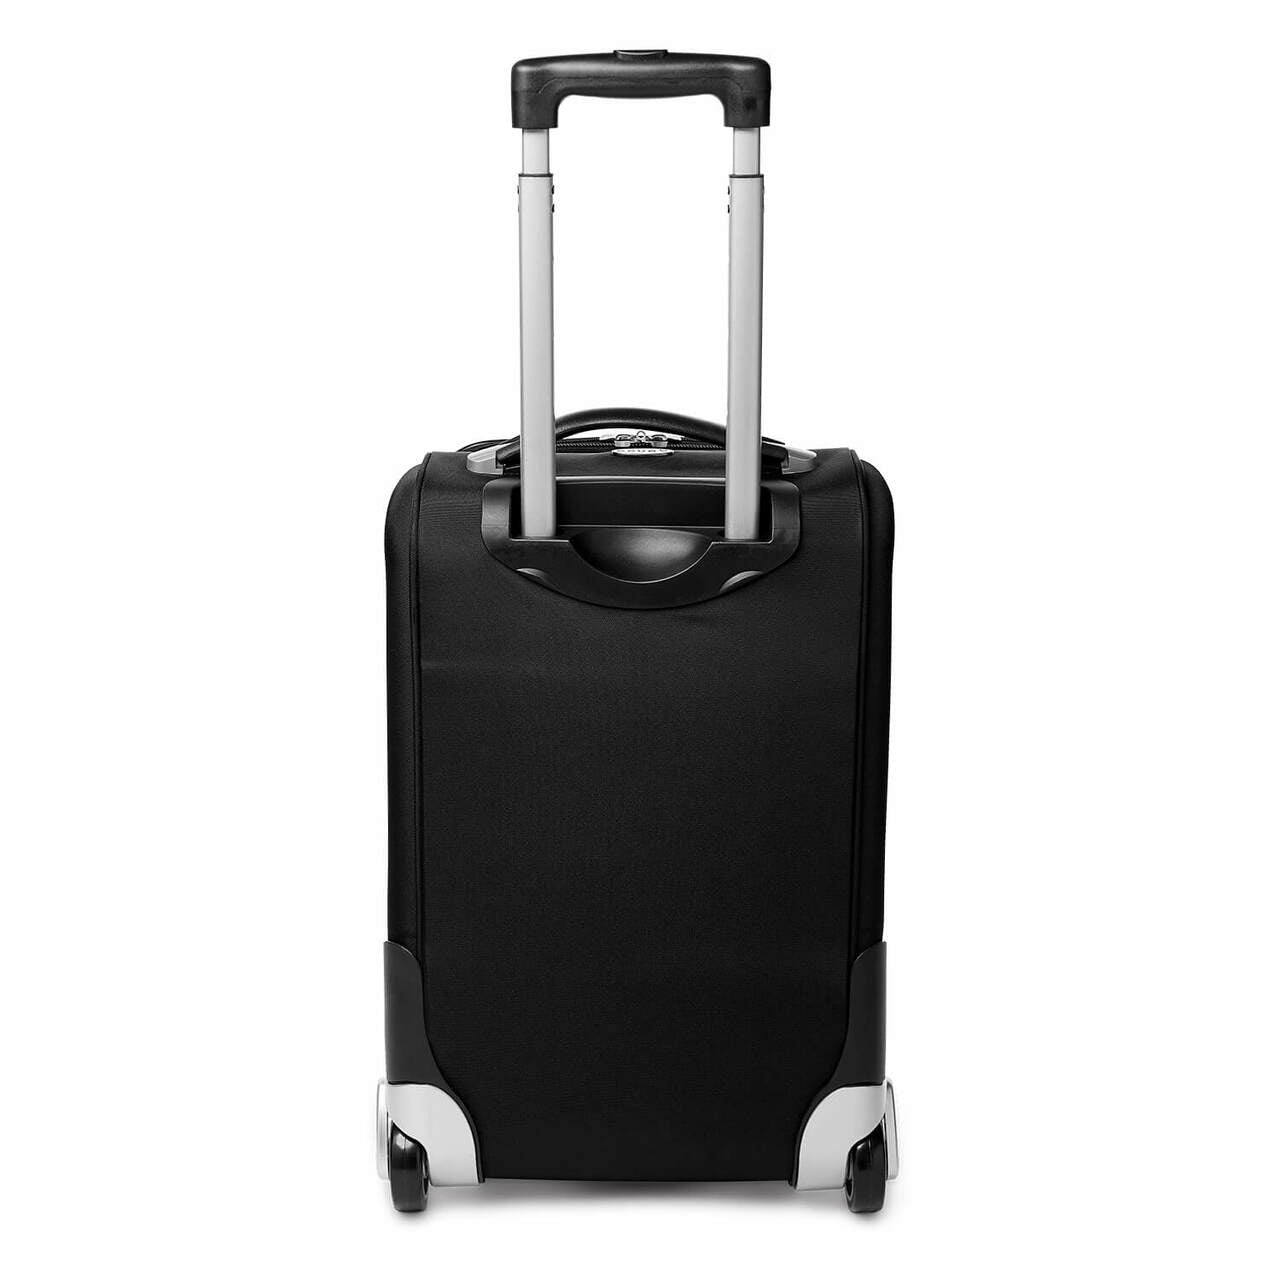 21" Rolling Carry On Luggage